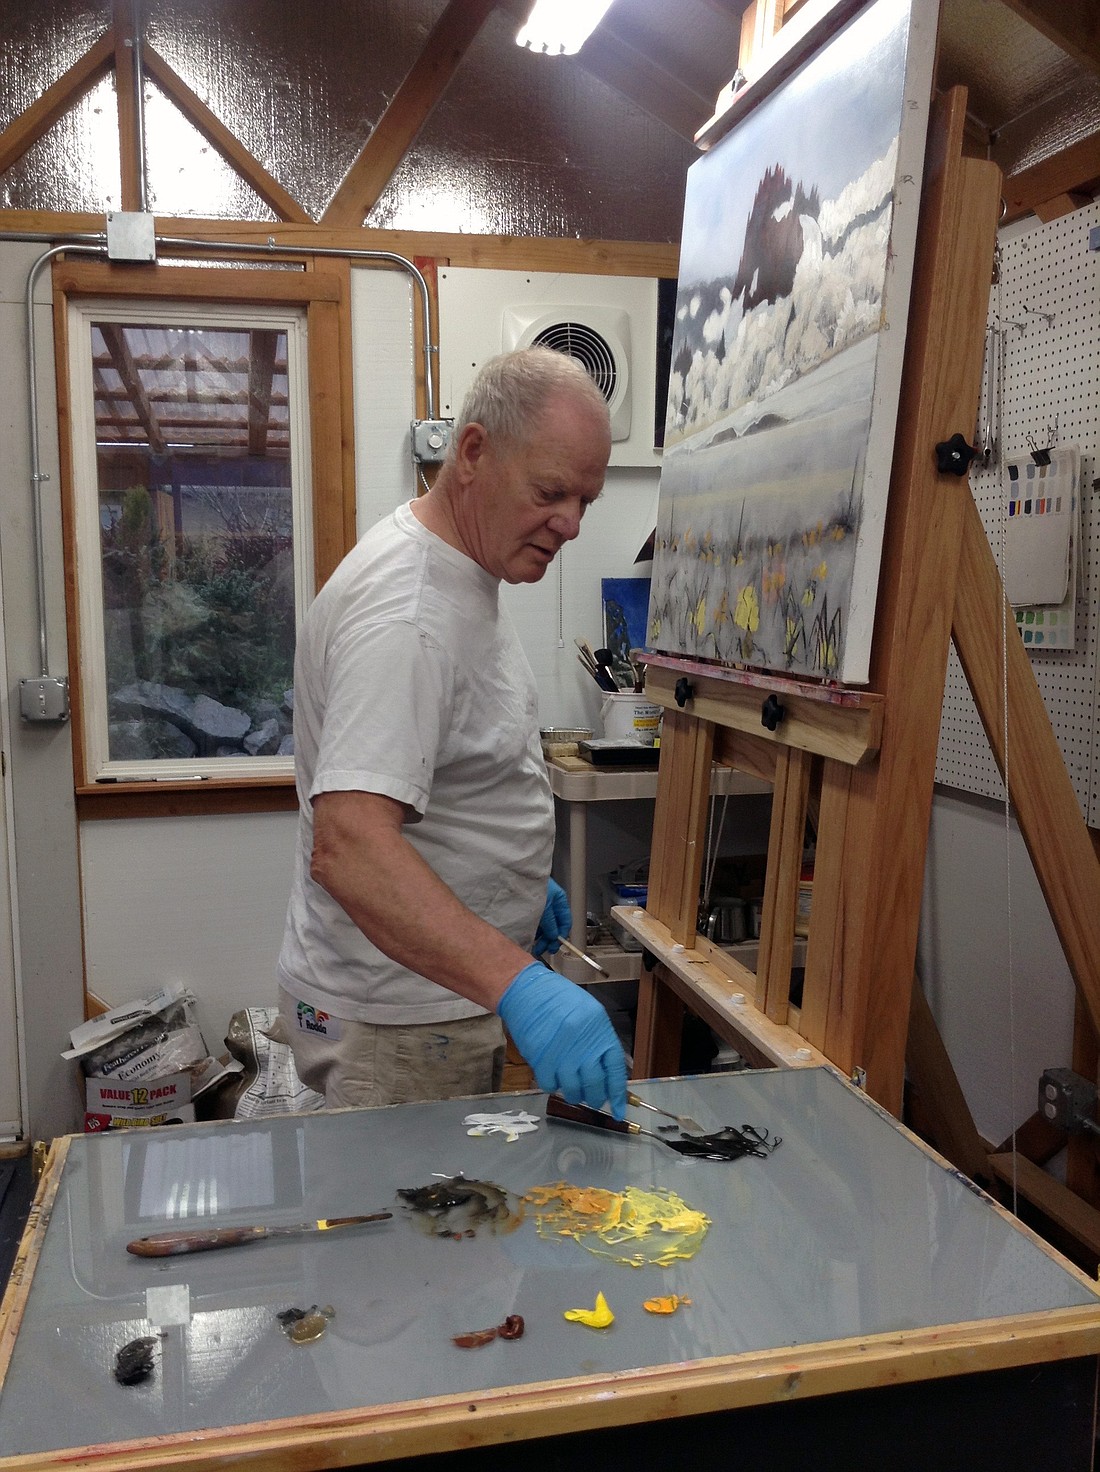 See Gene Jaress work on his limited-edition woodcut prints at his Mount Vernon studio during the 18th annual NW Art Beat Studio Tour taking place from 10 a.m. to 6 p.m. July 16–17 at locales throughout Skagit County. The free, self-guided tour is put on by Skagit Artists.